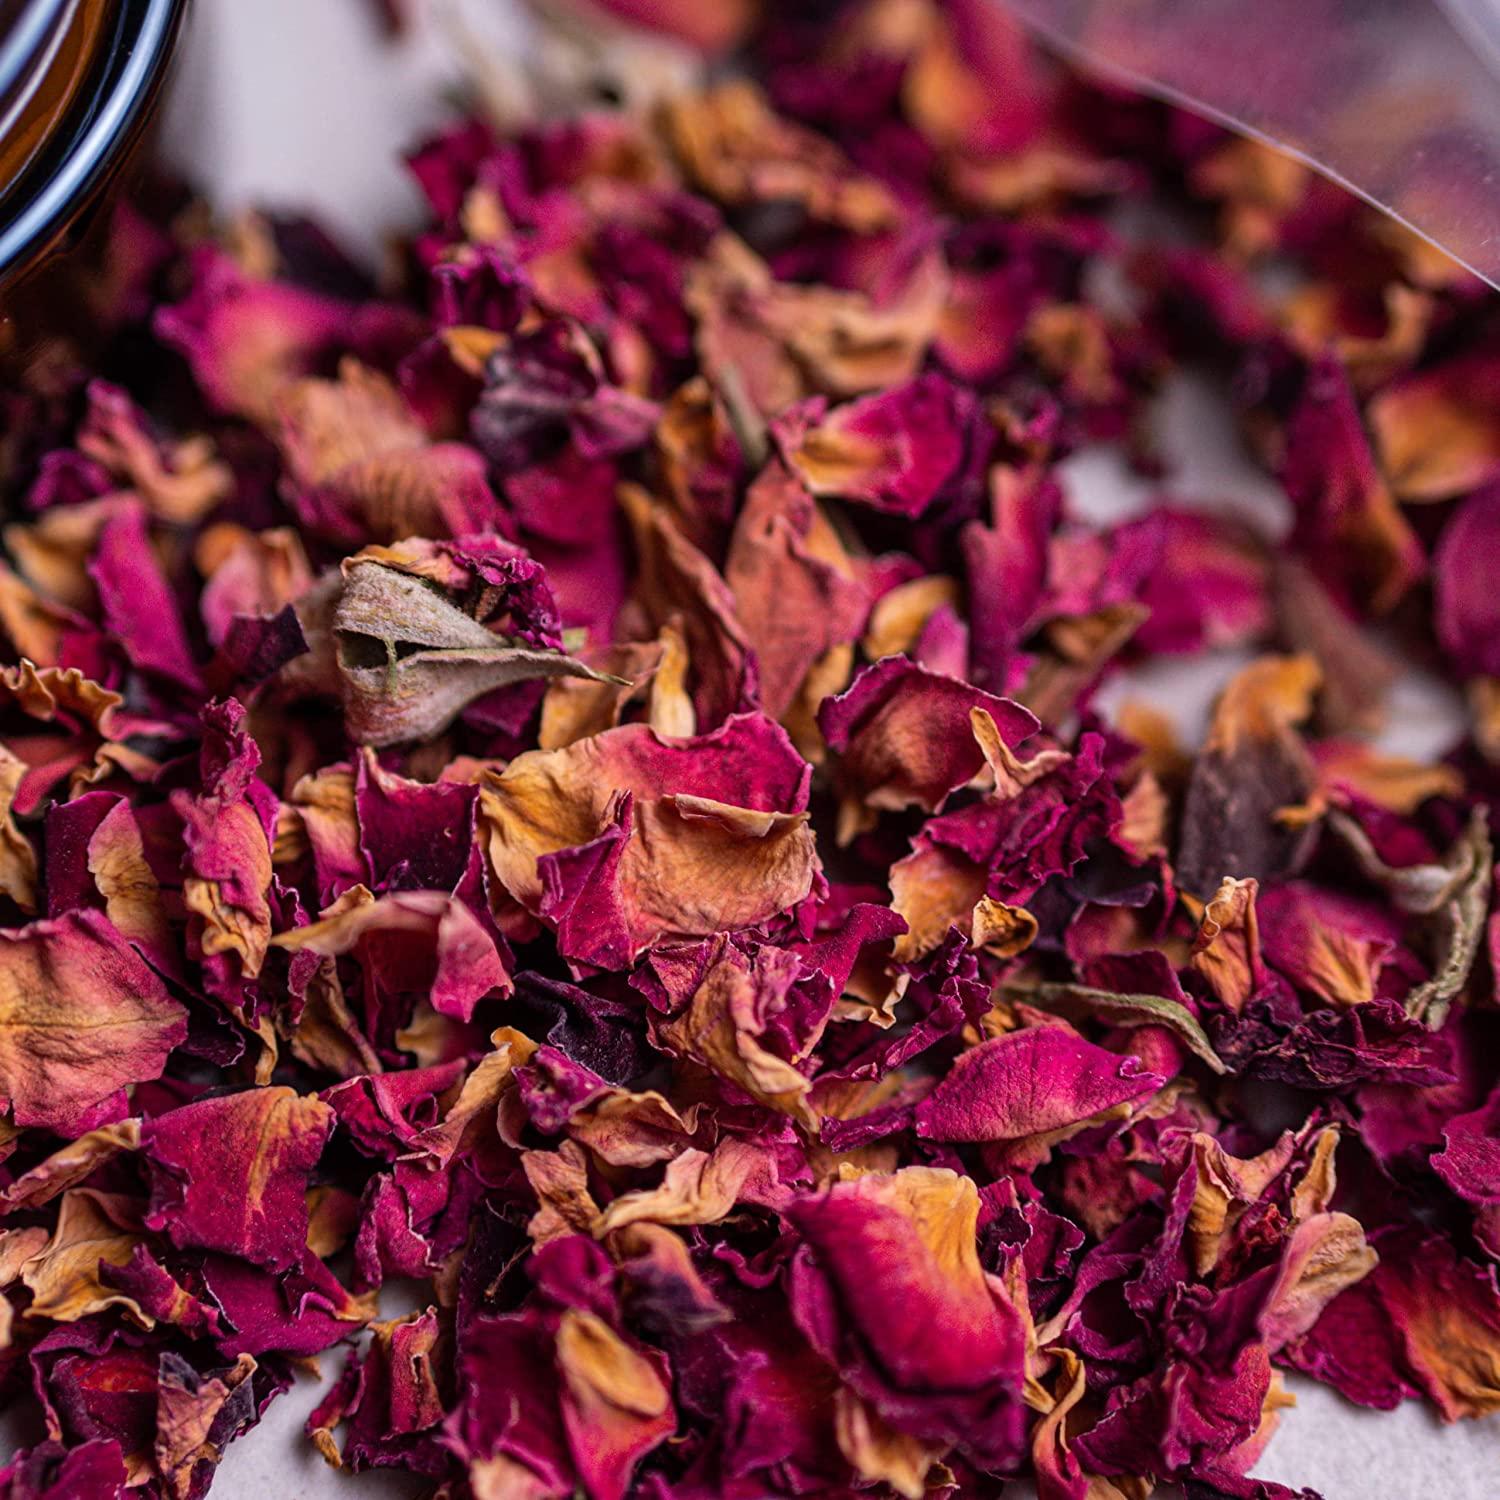 Dry Rose Petals, Red and Fragrant for Tea, Baking, Soap & Candle, Sachets,  Baths, Aromatherapy, Oil Infusions, Tinctures